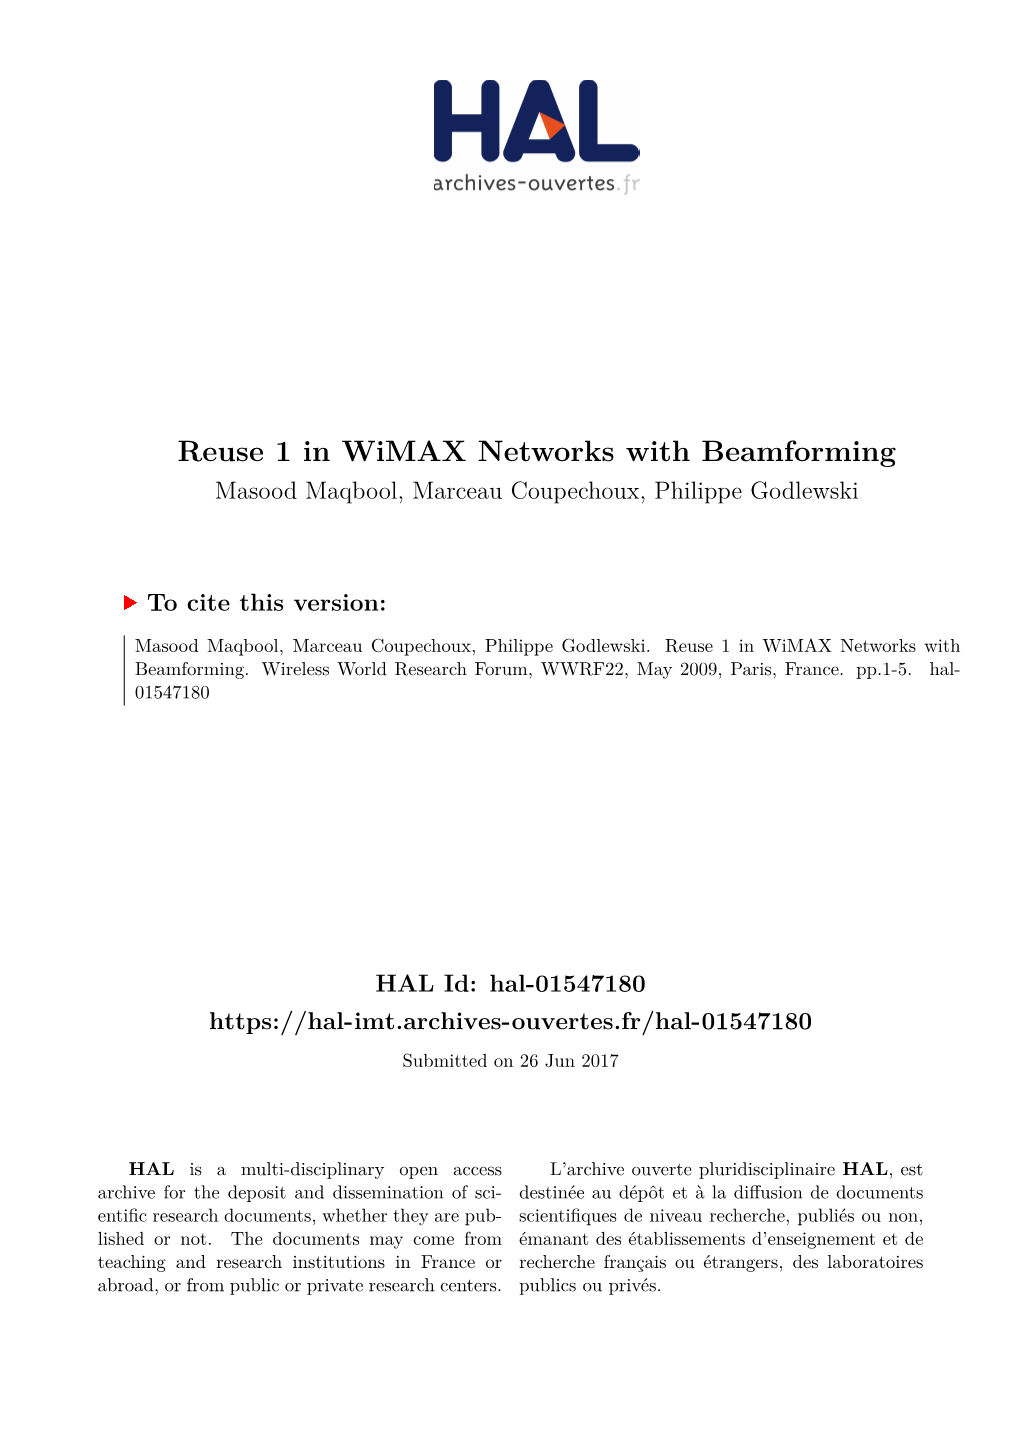 Reuse 1 in Wimax Networks with Beamforming Masood Maqbool, Marceau Coupechoux, Philippe Godlewski